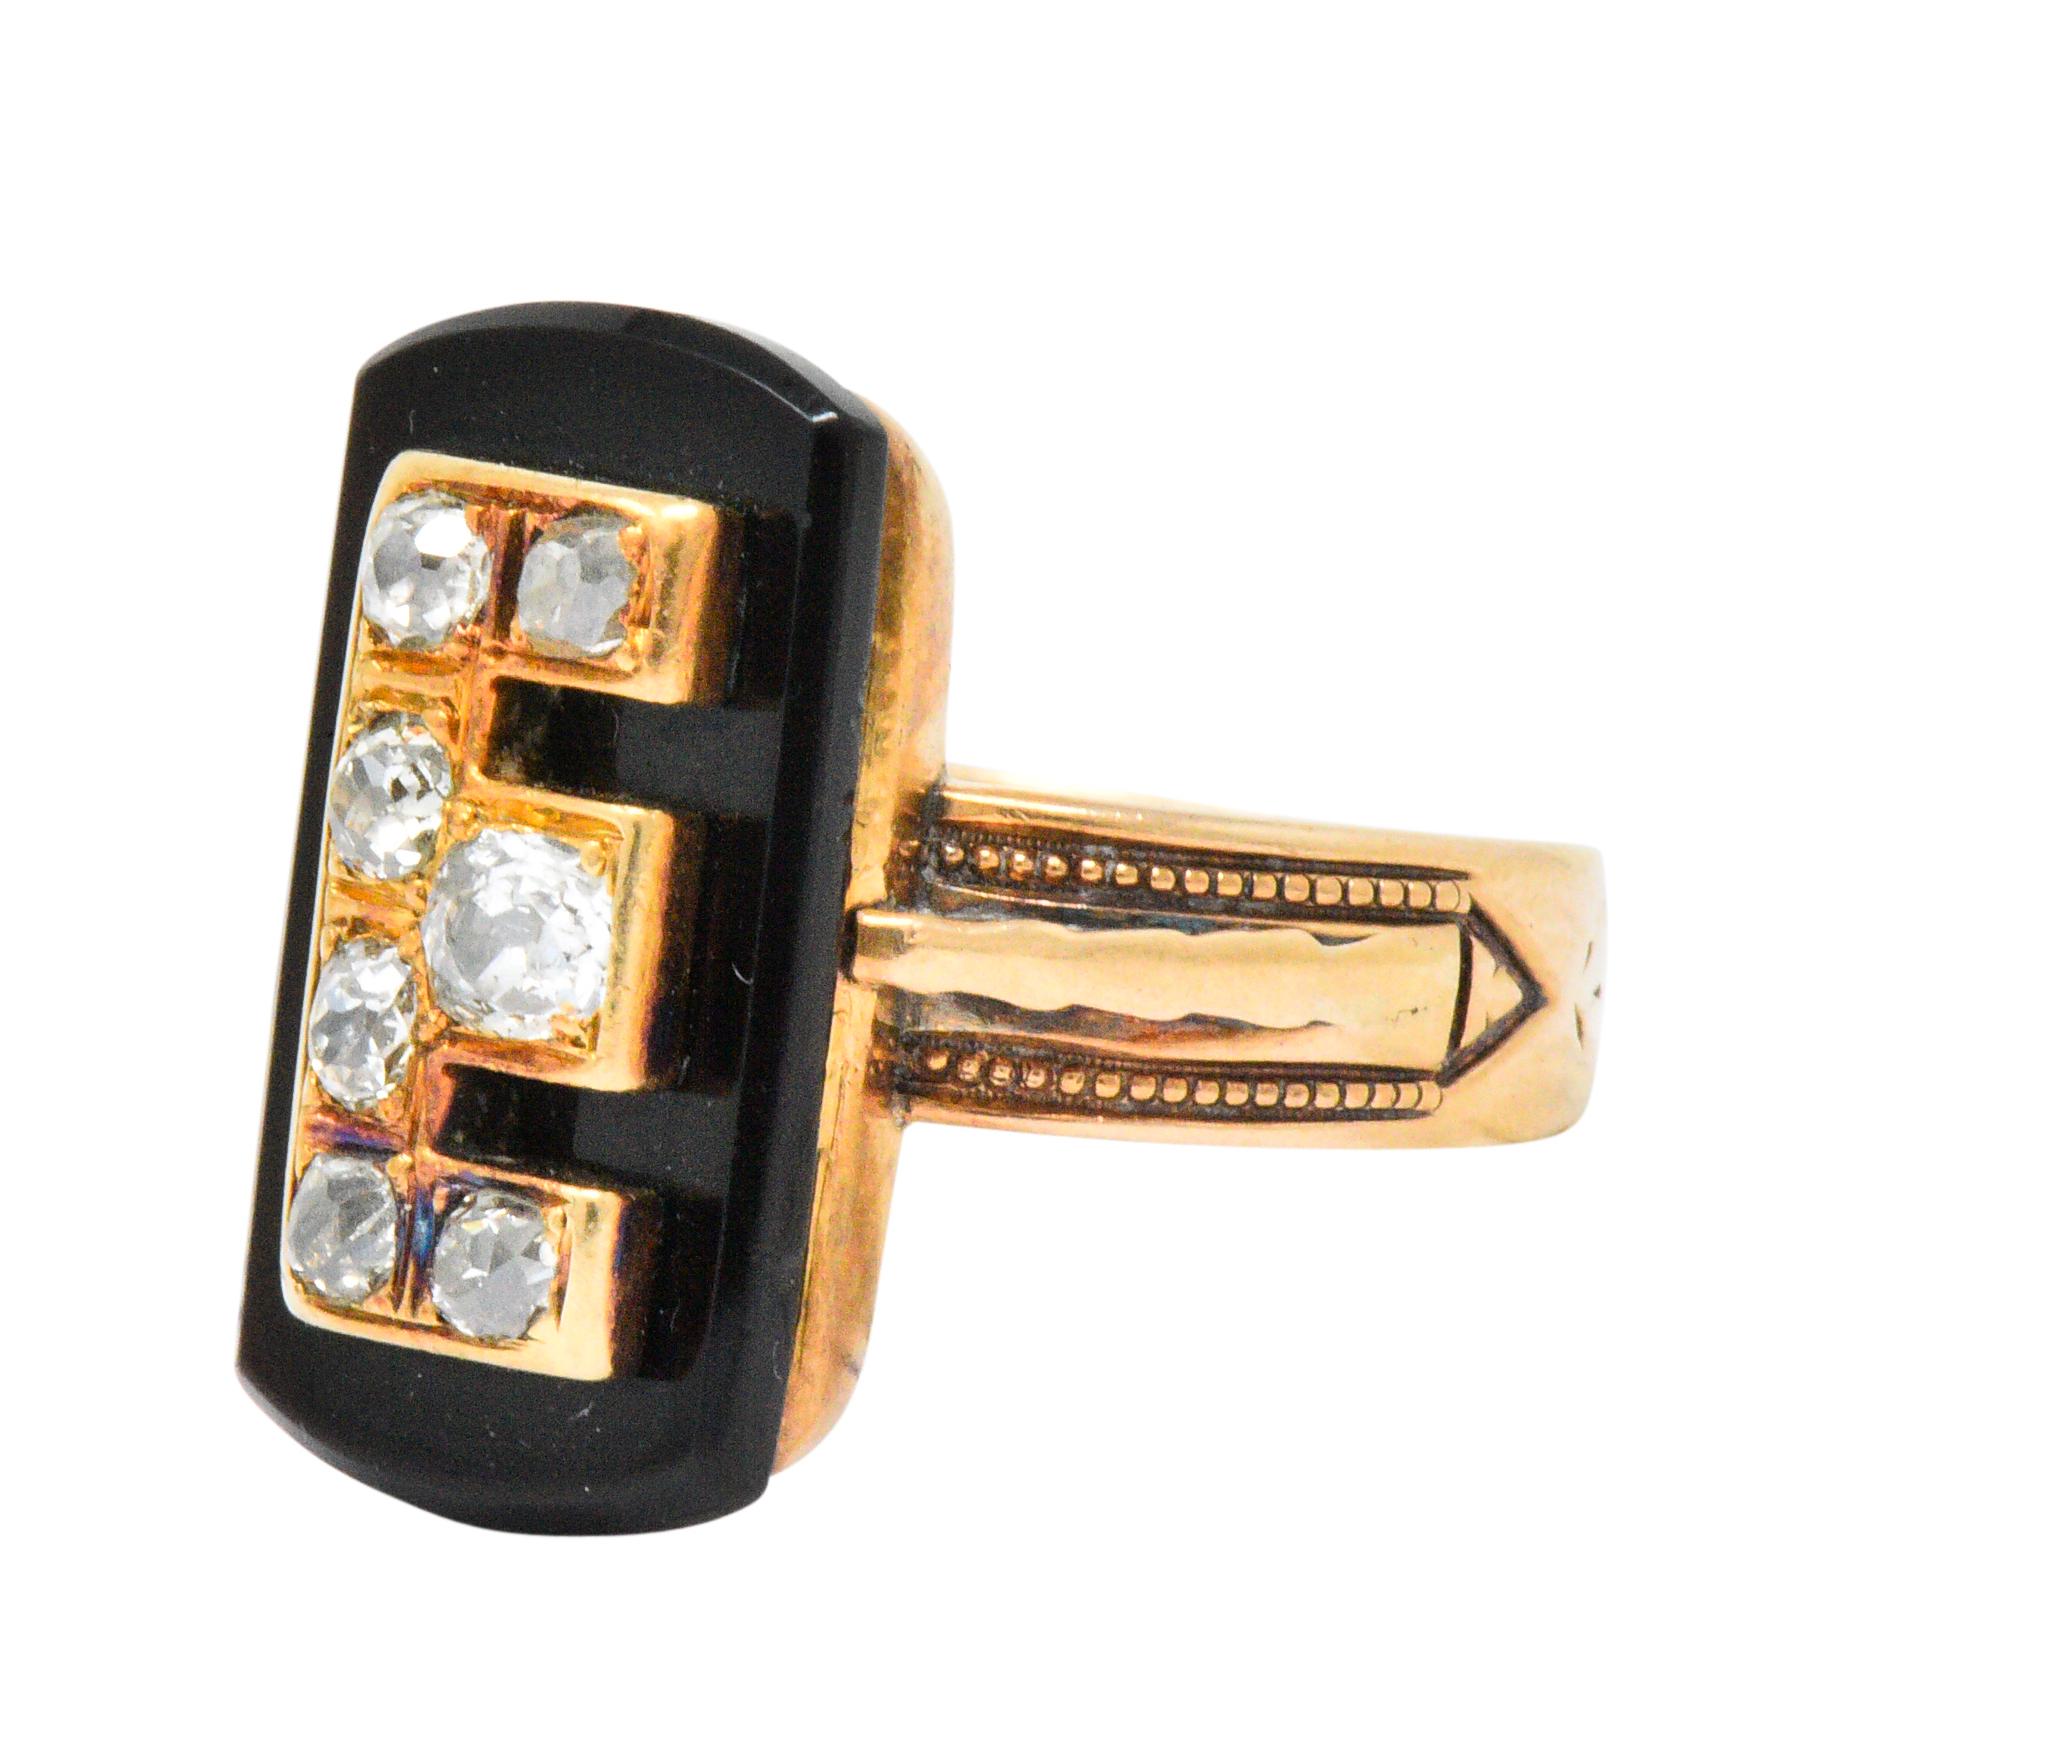 Centering a rounded rectangular polished onyx

Accented with an applied rose gold 